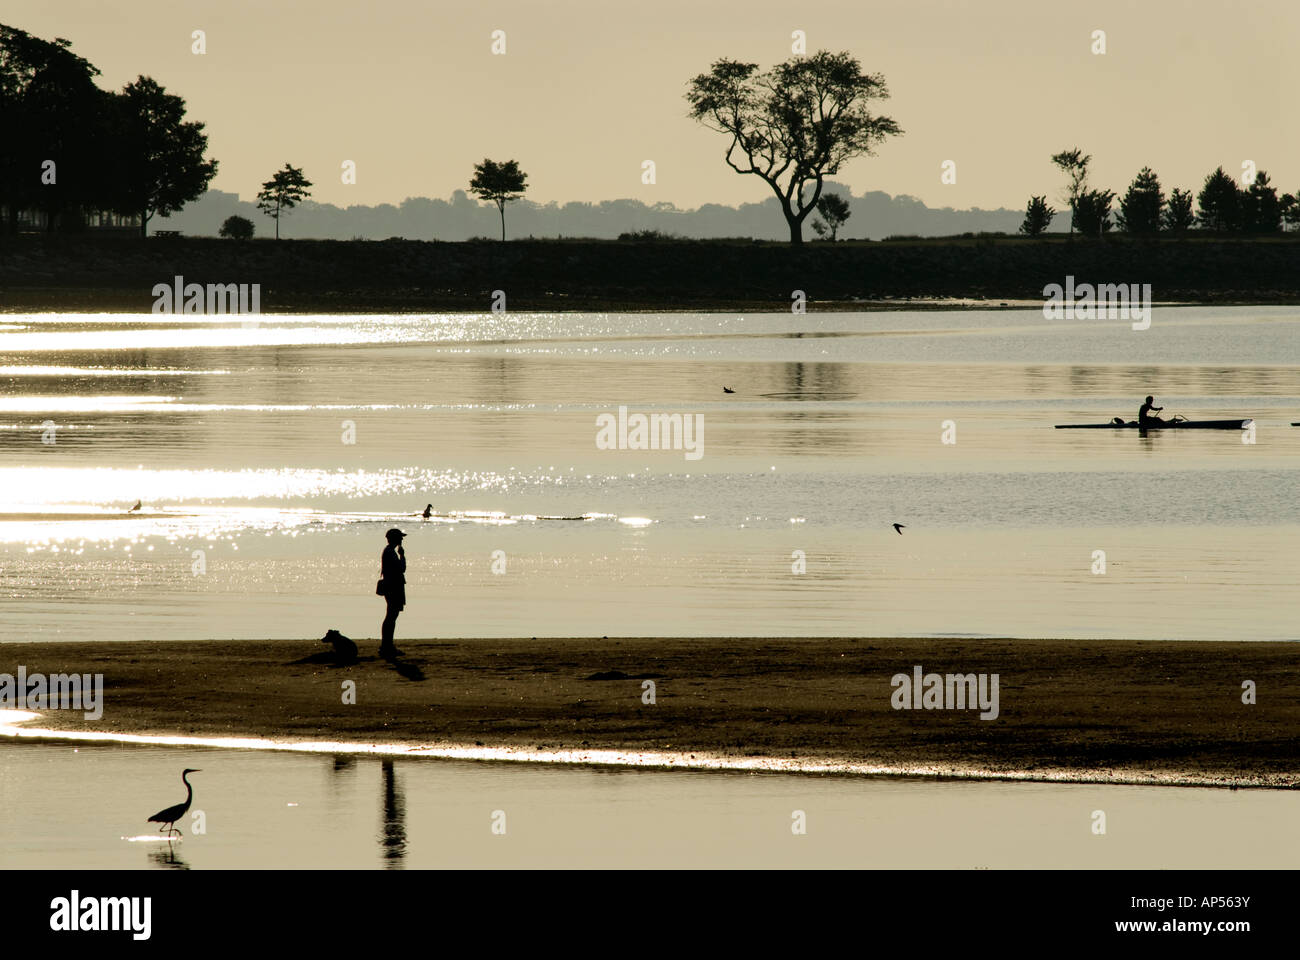 Sunrise silhouette of person standing on sand bar, Compo Beach, Westport, Ct, USA. Stock Photo